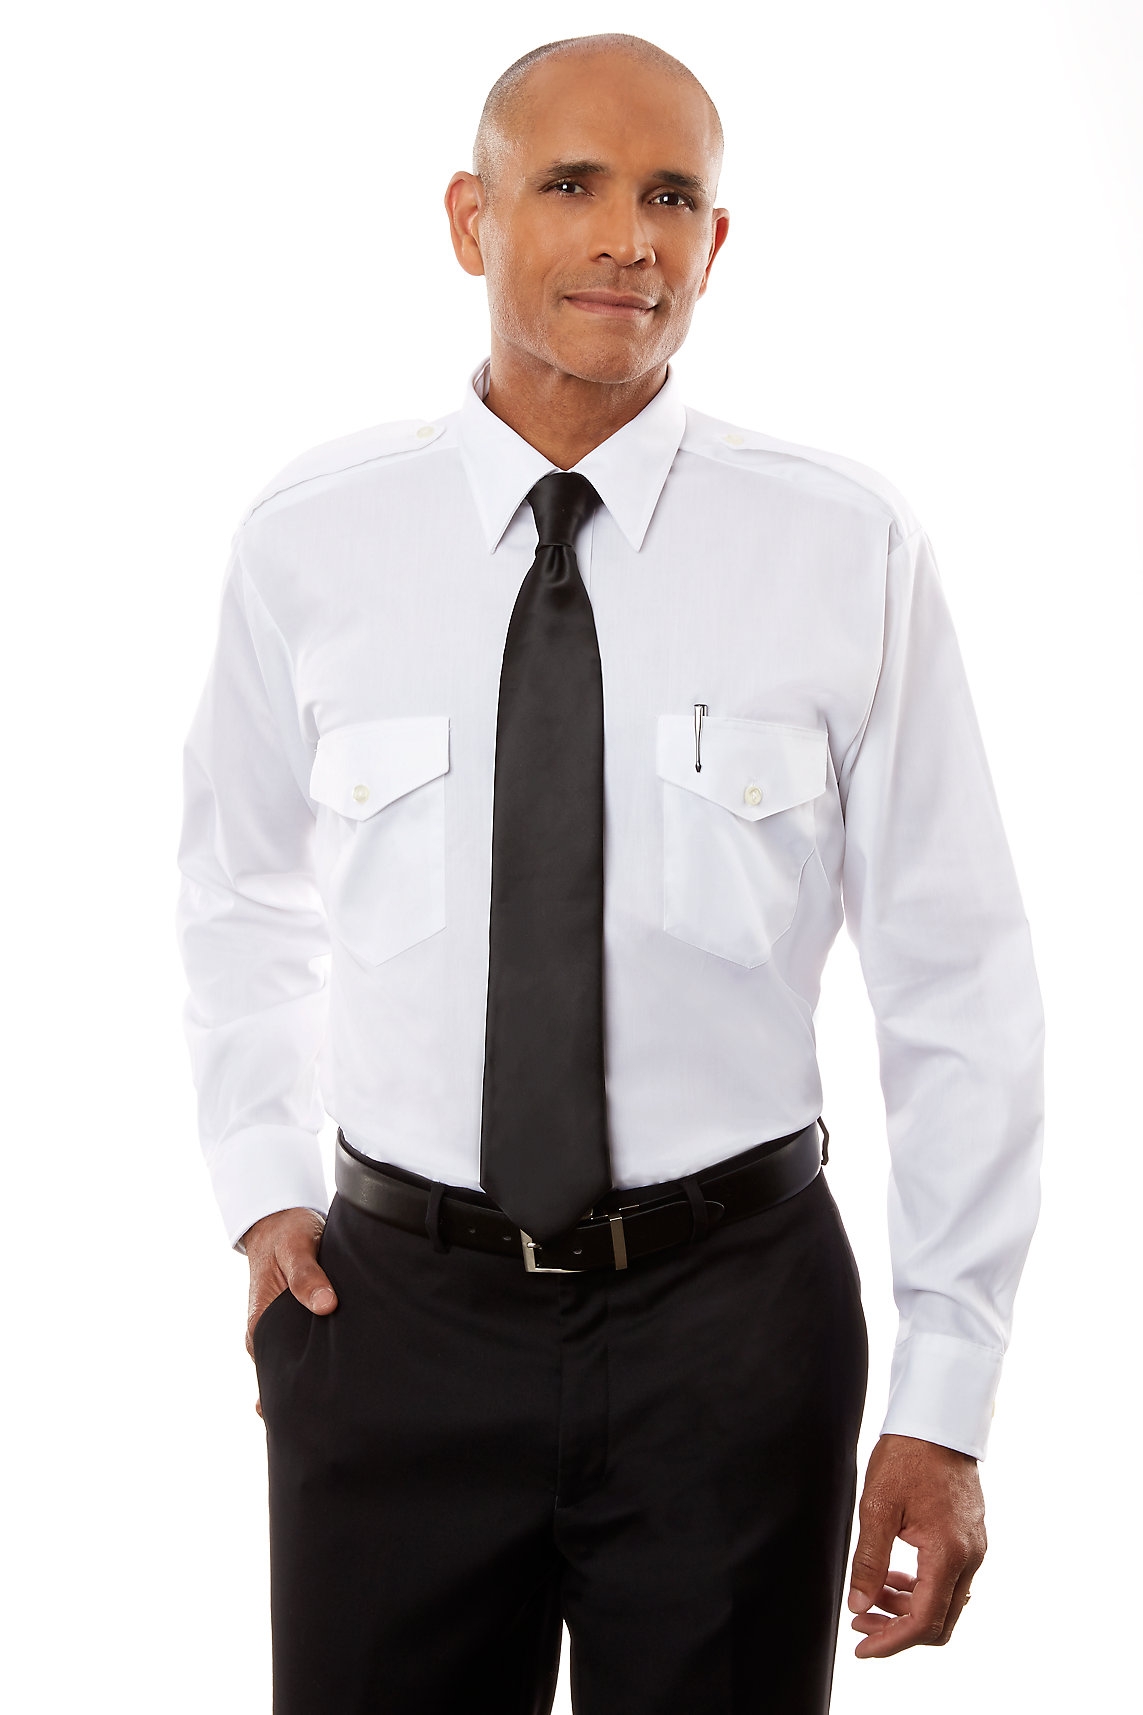 "THE AVIATOR SHIRT by Van Heusen - Short or Long Sleeve, Regular or Tall Fit, White or Blue-249